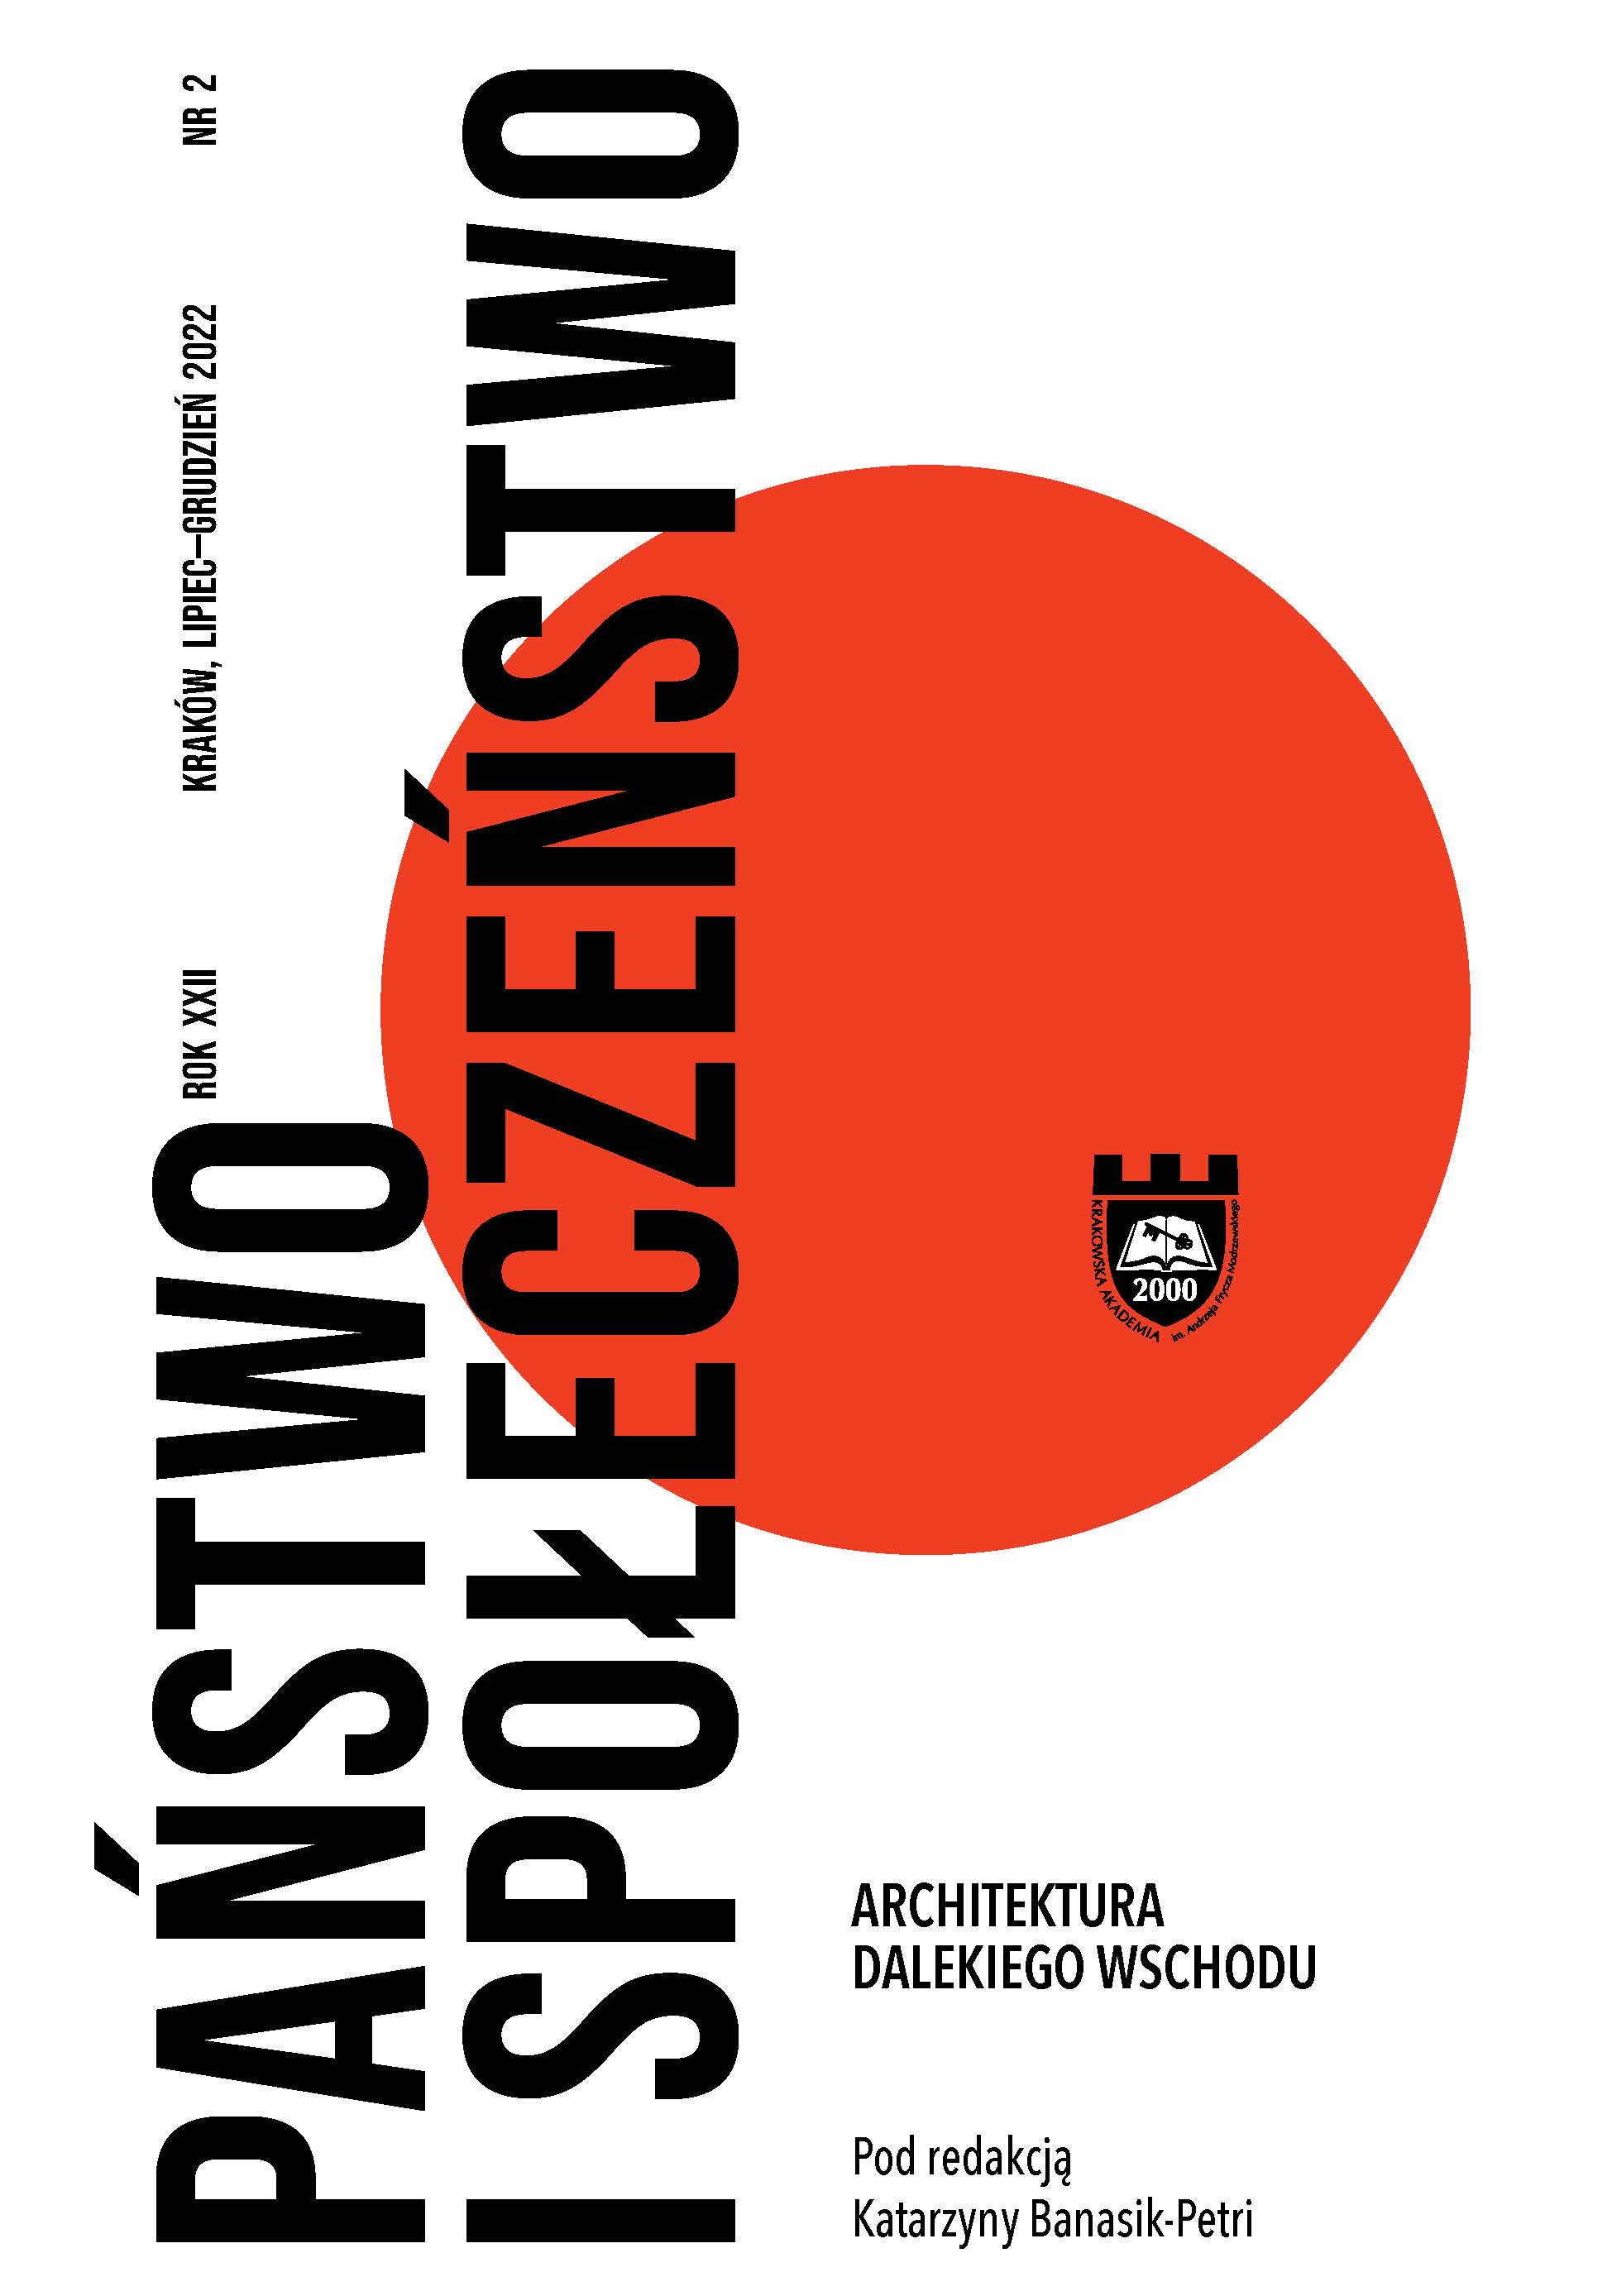 Joint design workshops of the Faculty of Architecture and Fine Arts of the Andrzej Frycz Modrzewski Krakow University and the Department of Architecture at the Faculty of Engineering and Design of the Hosei University in Tokyo. Didactic experiences a Cover Image